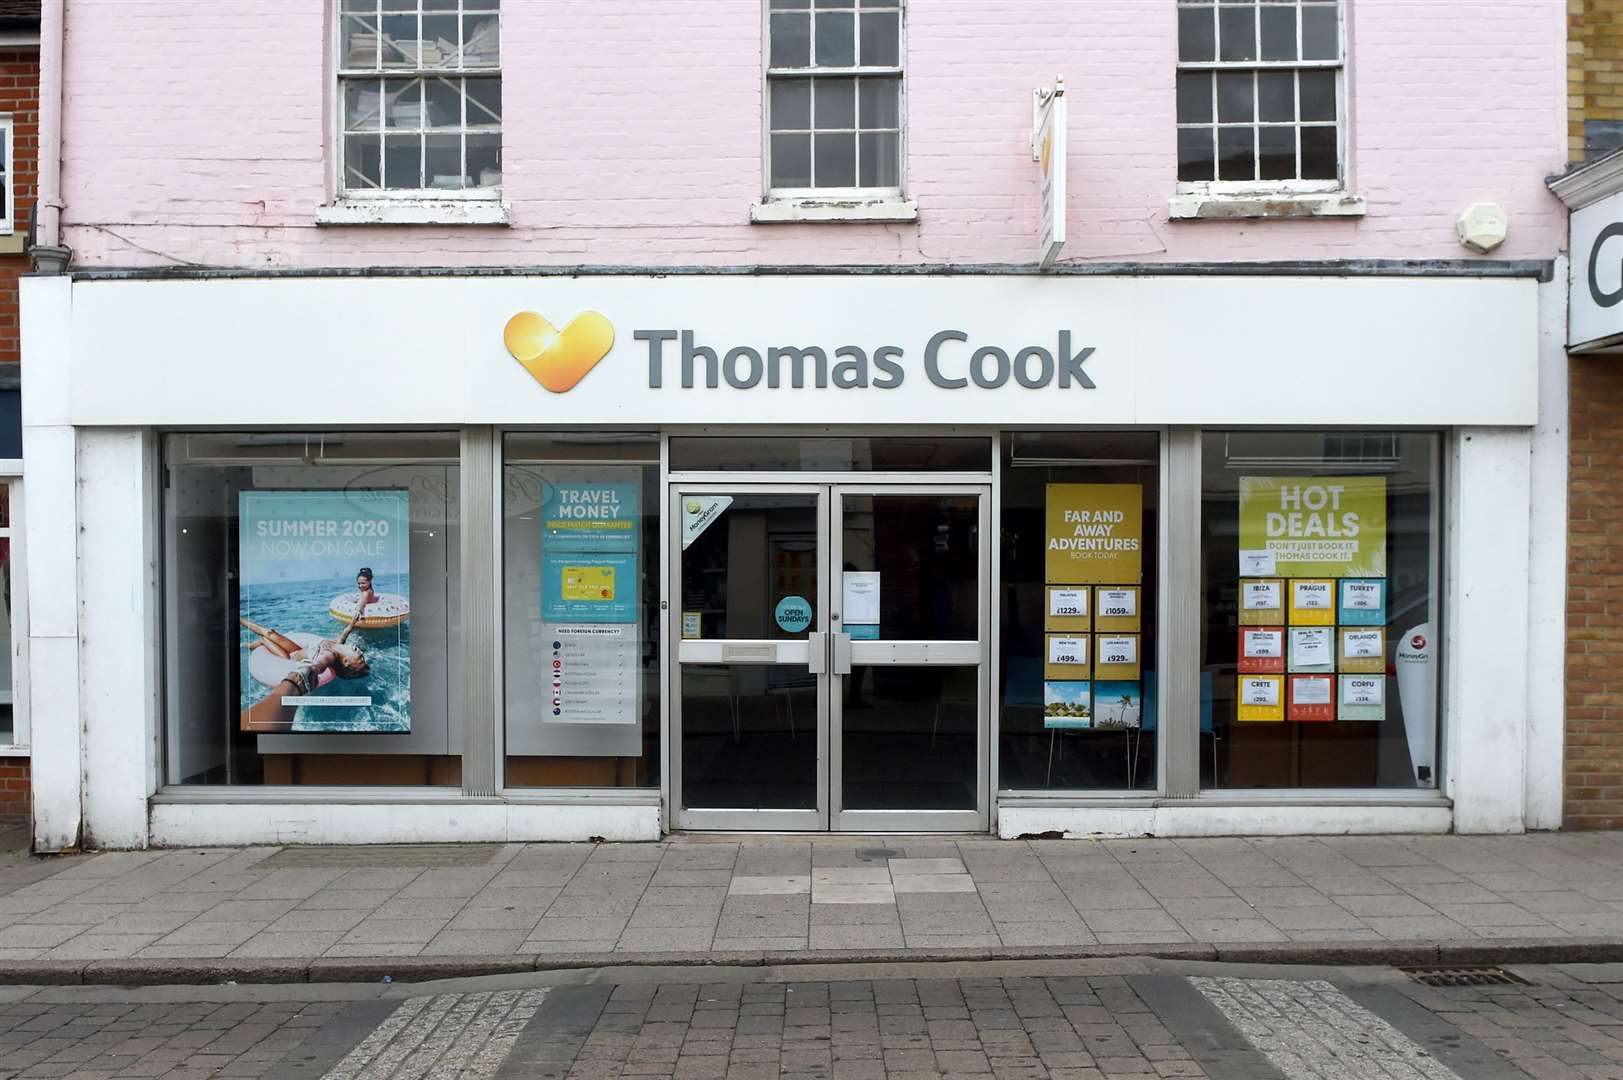 All Thomas Cook branches closed when the company went bust in 2019